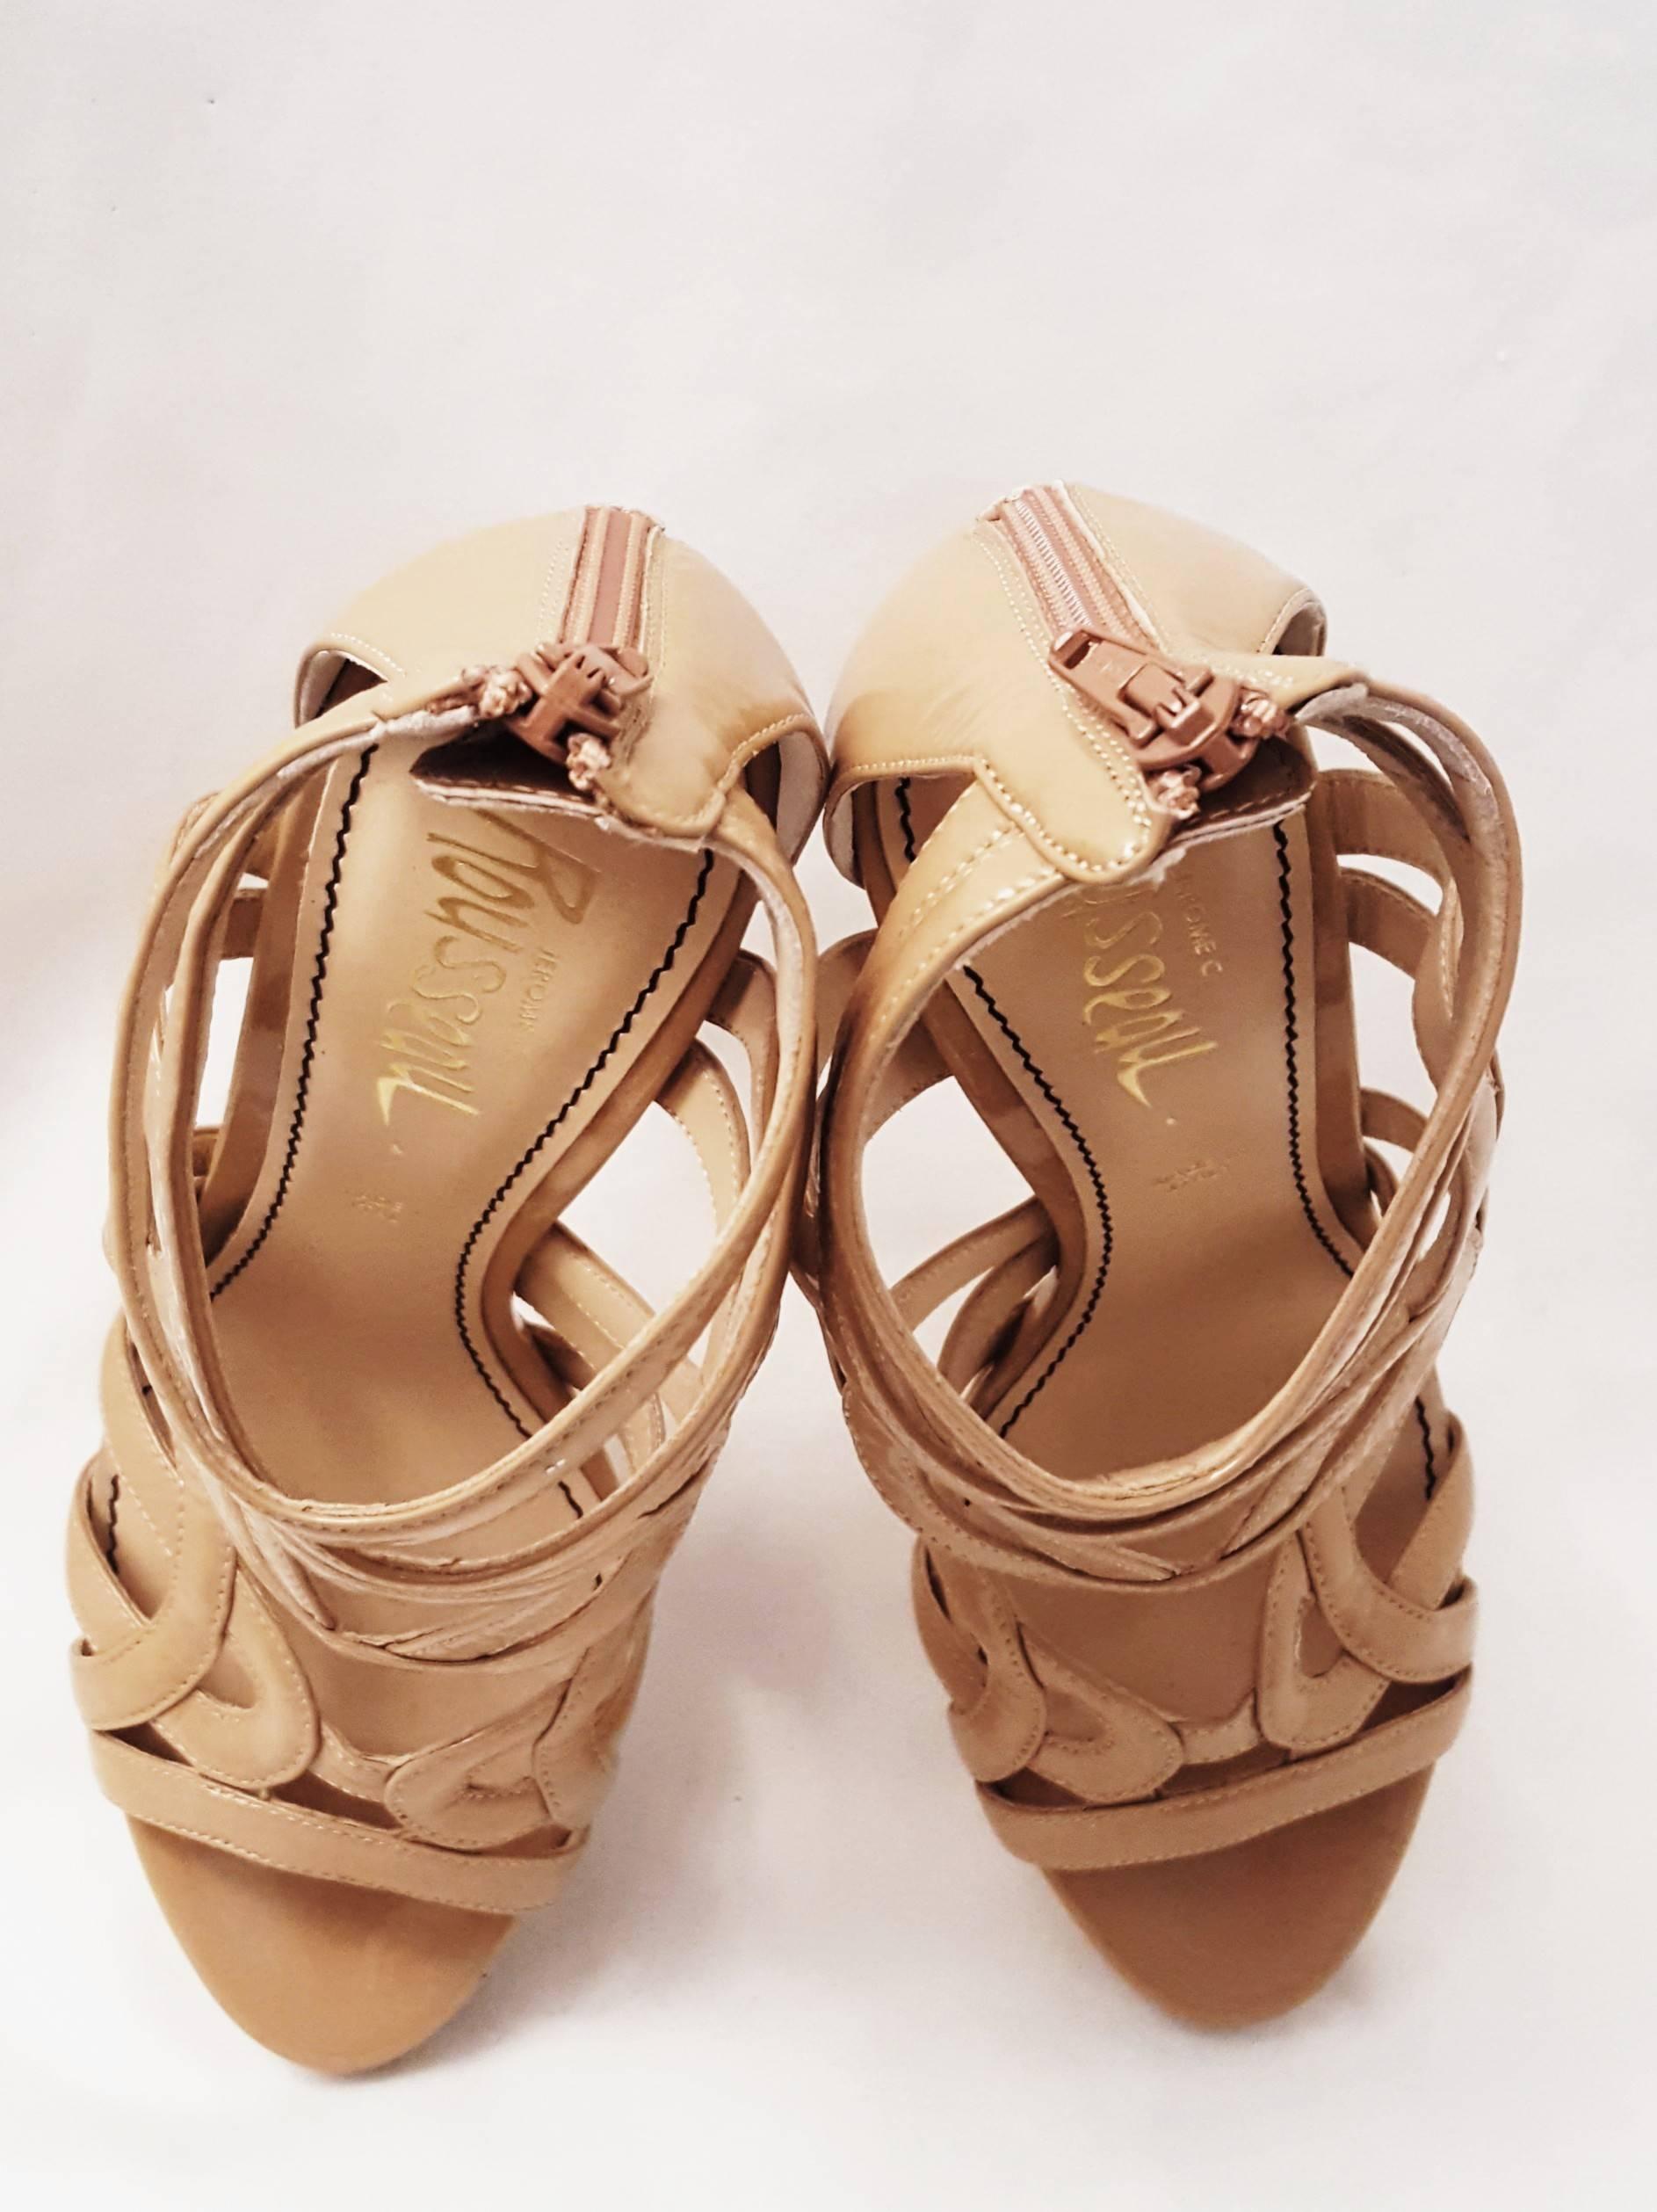 Jerome C. Rousseau Orner Nude Strappy Patent Leather High Heel Sandals In New Condition For Sale In Palm Beach, FL